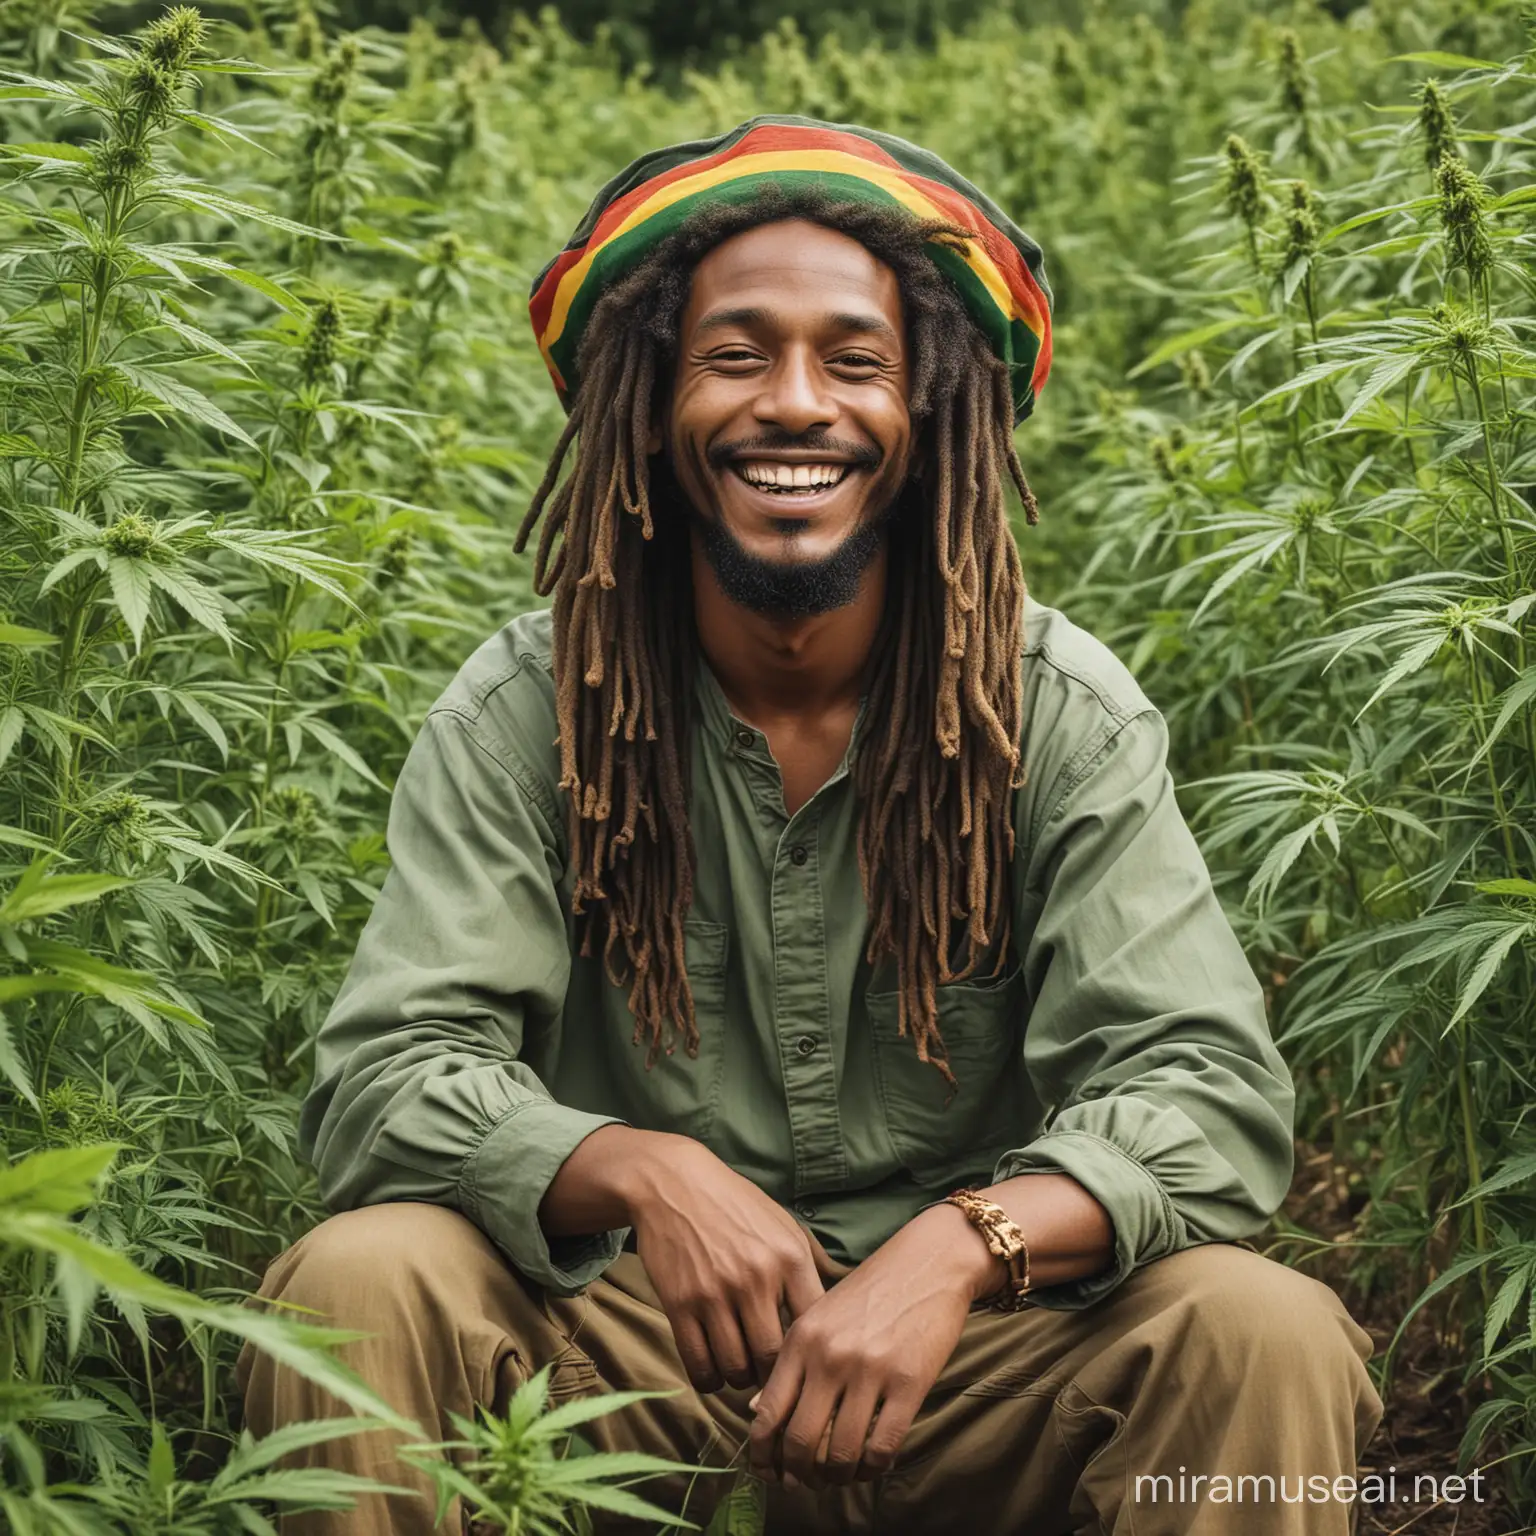 A rasta man siting in a field of cannabis and he Smile, 